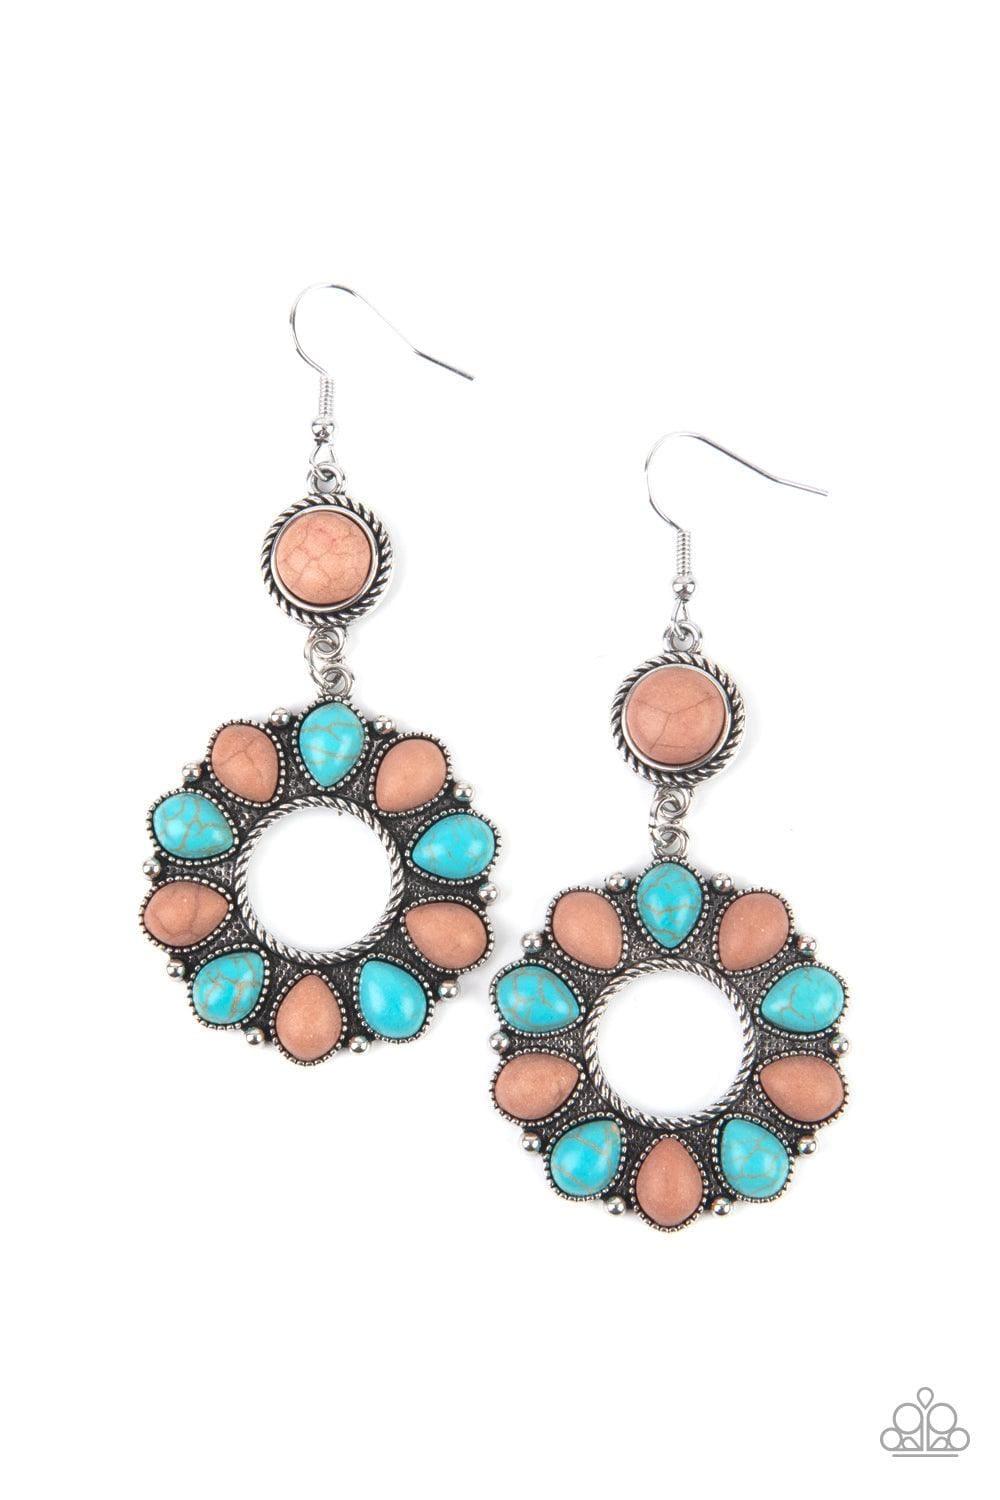 Paparazzi Accessories - Back At The Ranch - Multicolor Earrings - Bling by JessieK